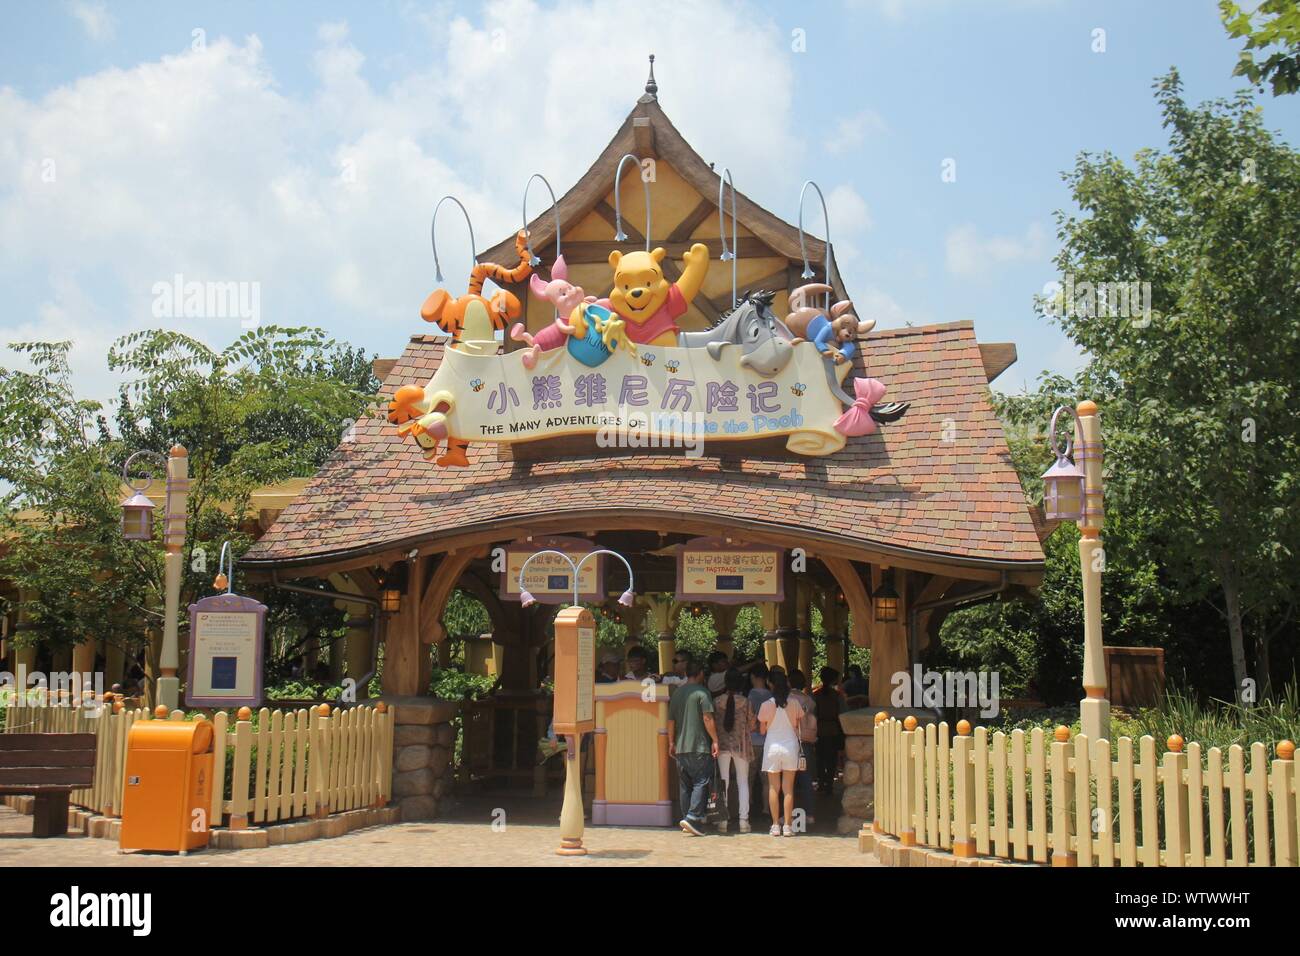 Shanghai, Shanghai, China. 12th Sep, 2019. Shanghai, CHINA-Shanghai Disneyland popular punch-in projects: Mulan Garden, Dream Princess Castle, cartoon IP float parade, toy mobilization show, Alice sleepwalking Wonderland Labyrinth, tomorrow's Future concept car, Winnie the Bear Adventures, Caribbean Port Piracy and Theater performances, etc. Credit: SIPA Asia/ZUMA Wire/Alamy Live News Stock Photo